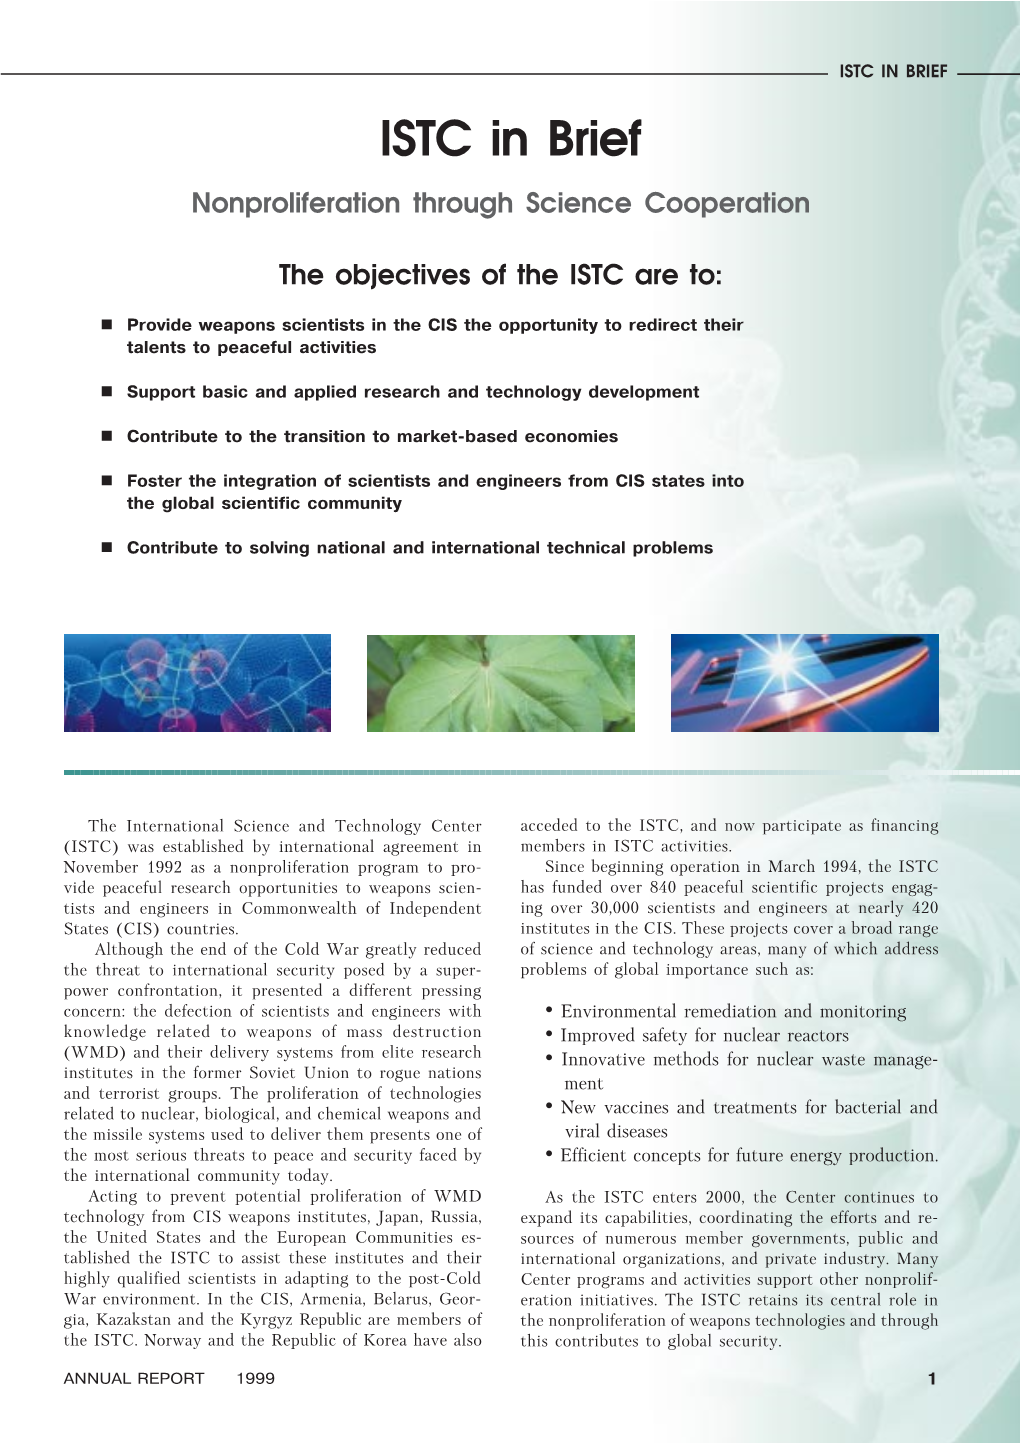 ISTC in BRIEF ISTC in Brief Nonproliferation Through Science Cooperation